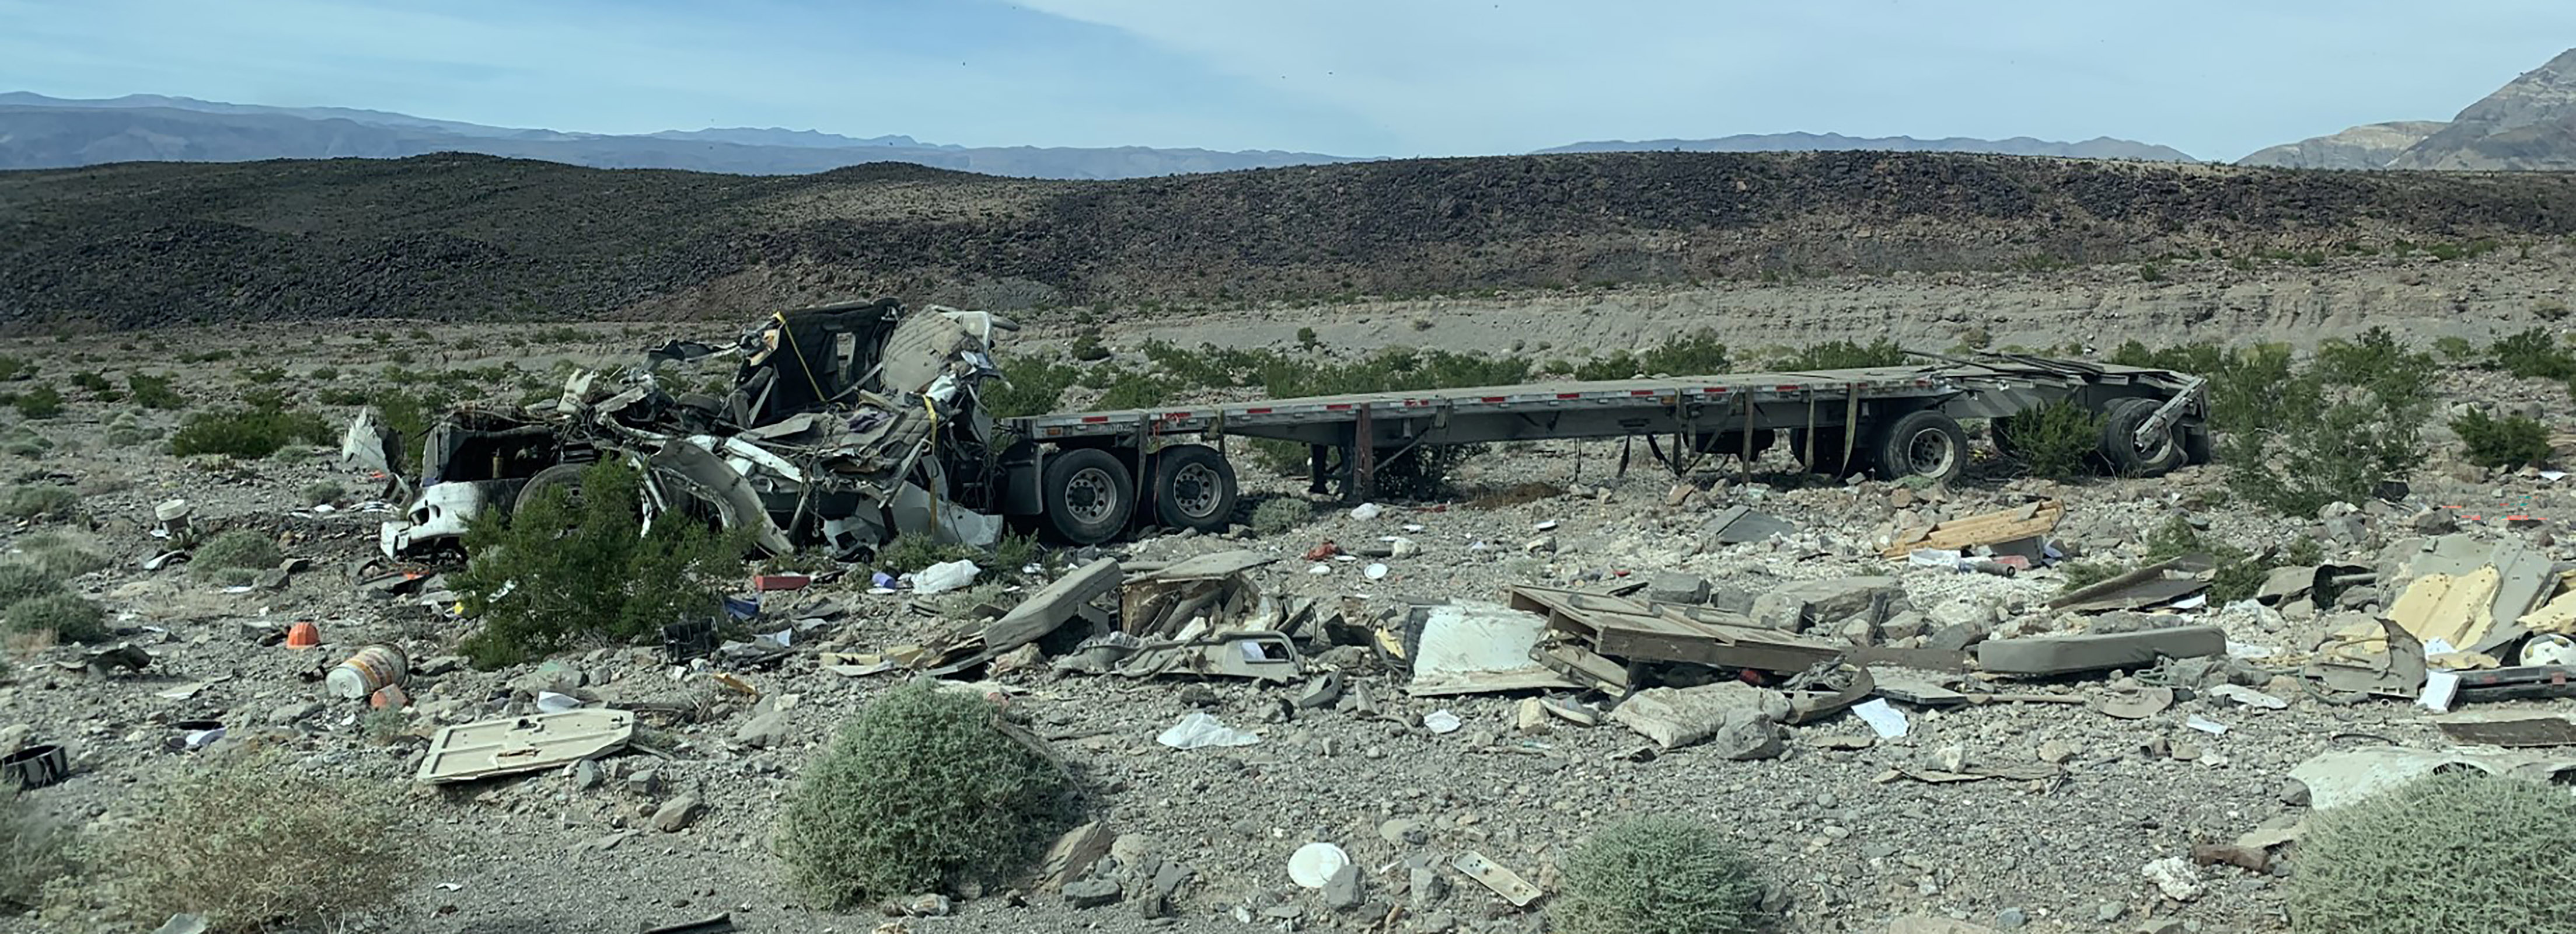 Crashed semi truck in rocky area of a valley. Truck is collapsed and debris is scattered around the ground.